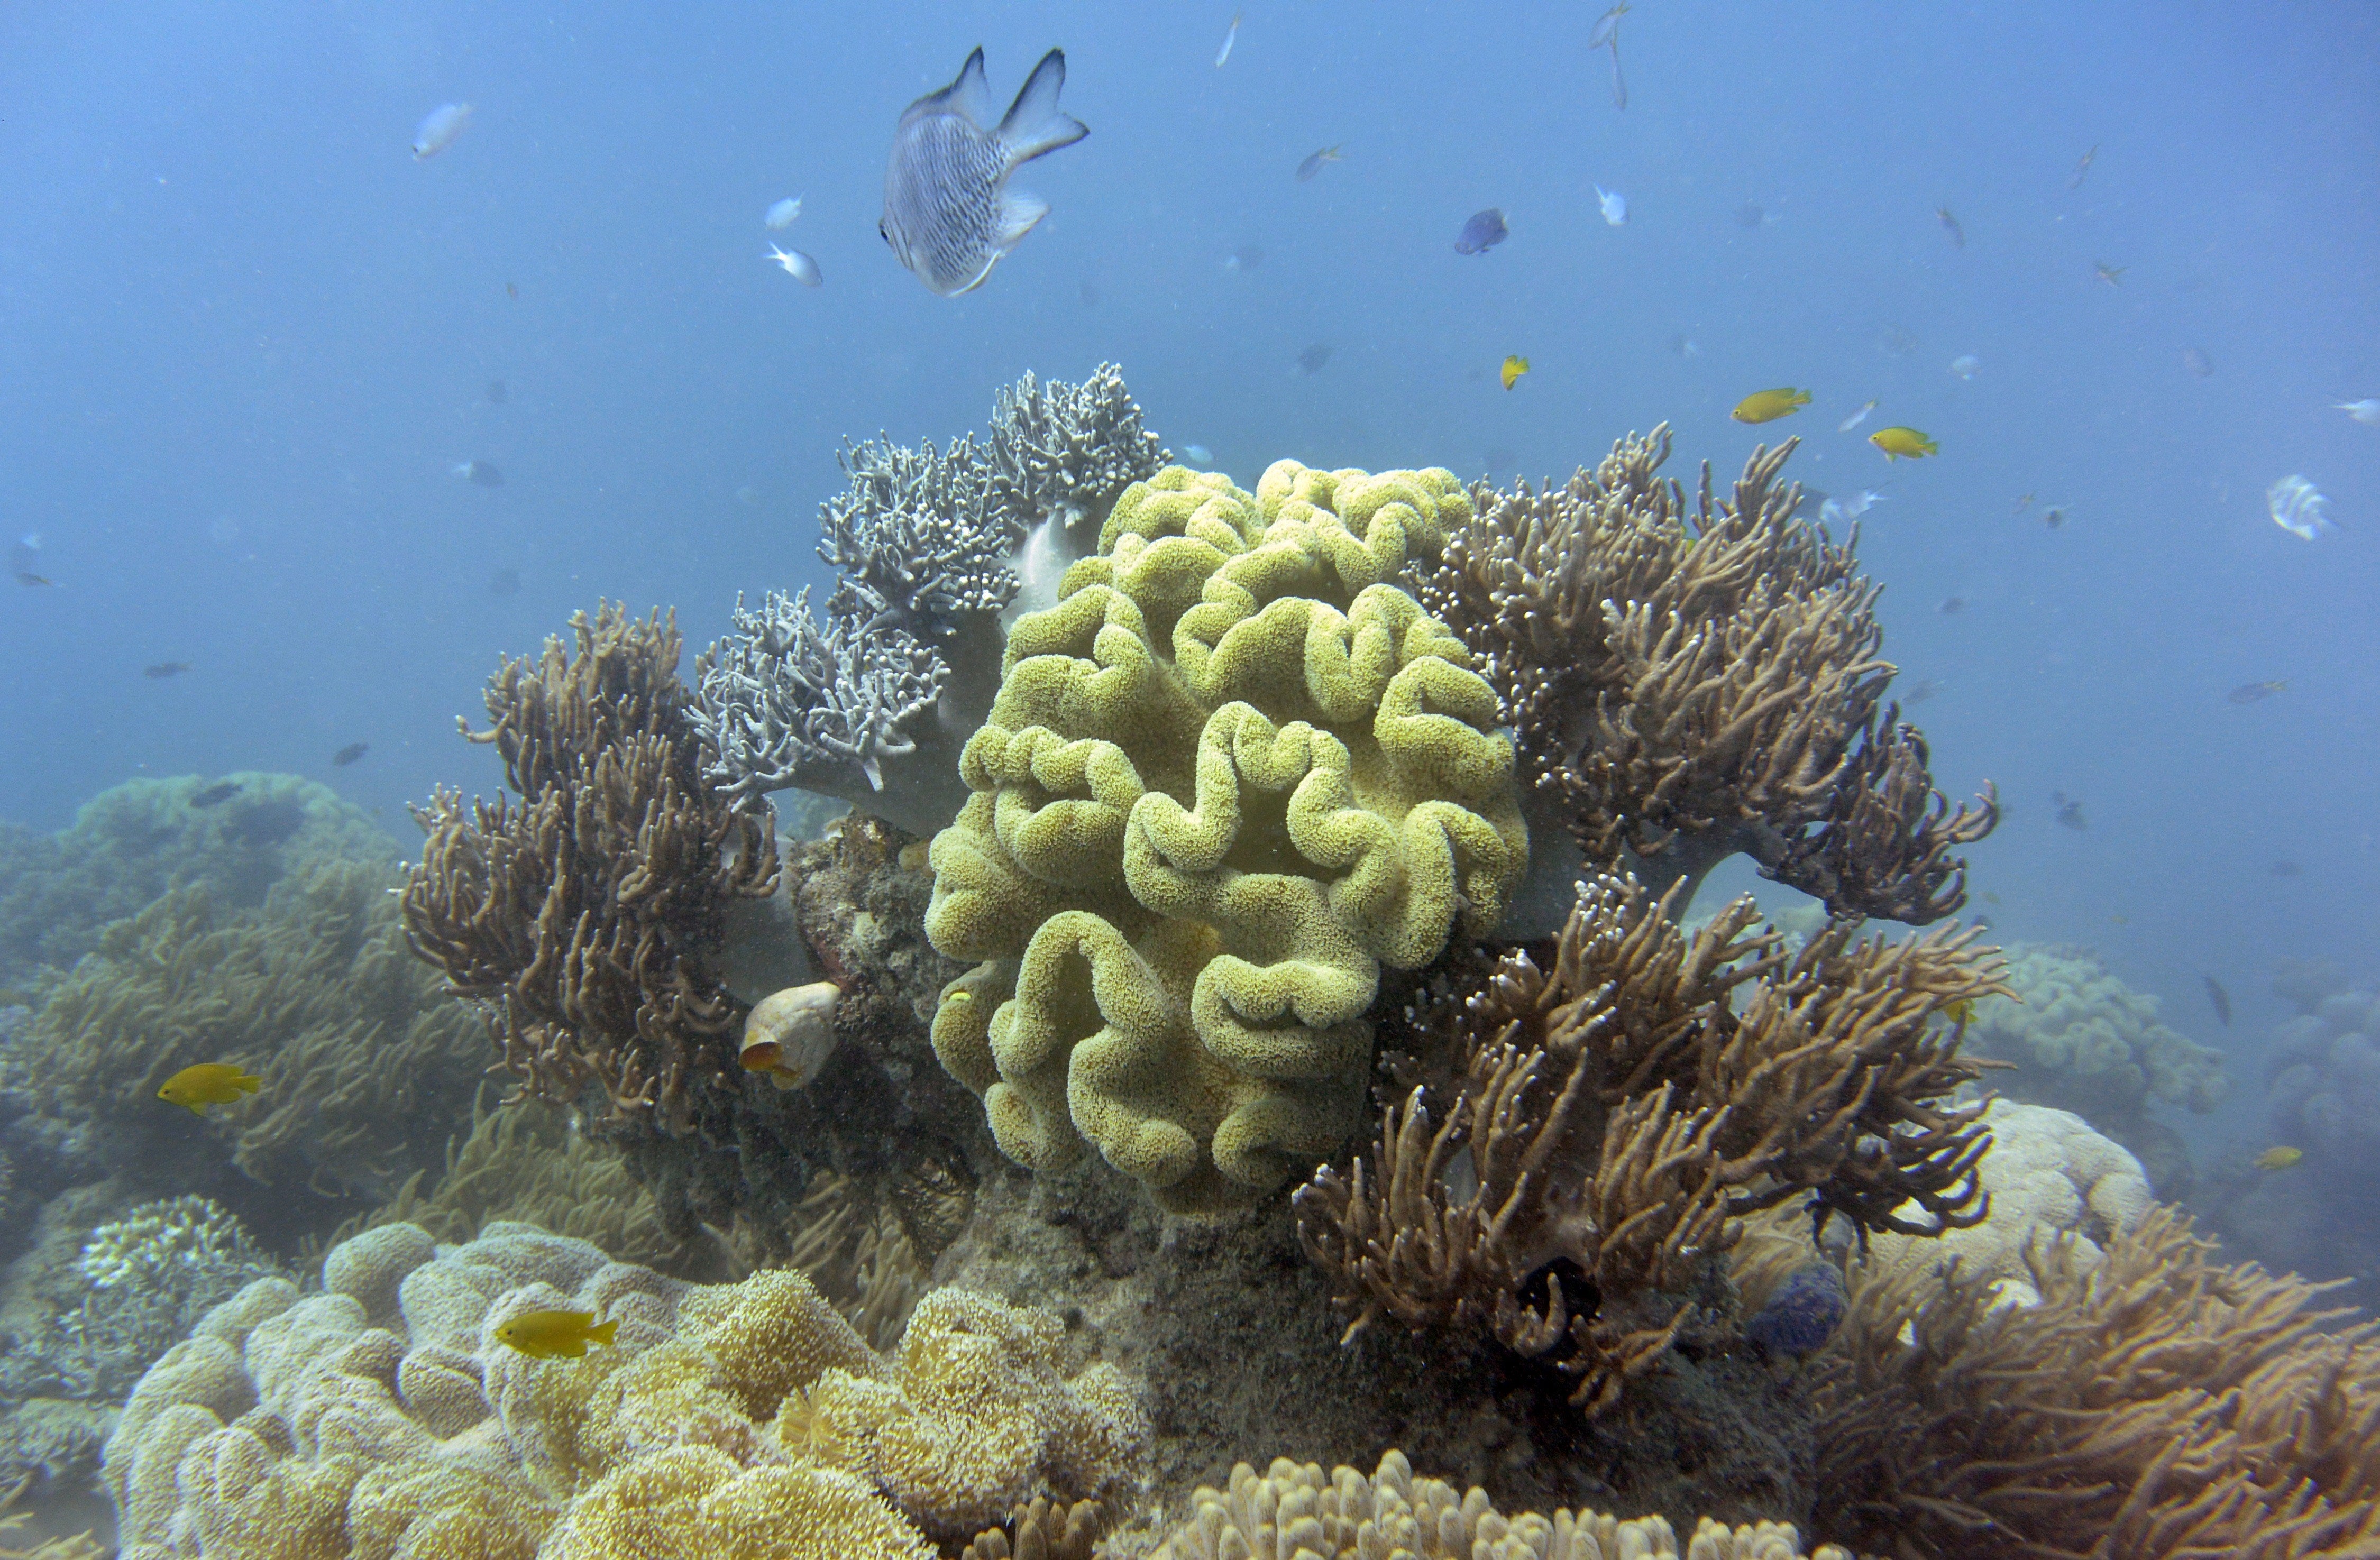 Photo taken on 22 September 2014 shows fish swimming through the coral on Australia’s Great Barrier Reef